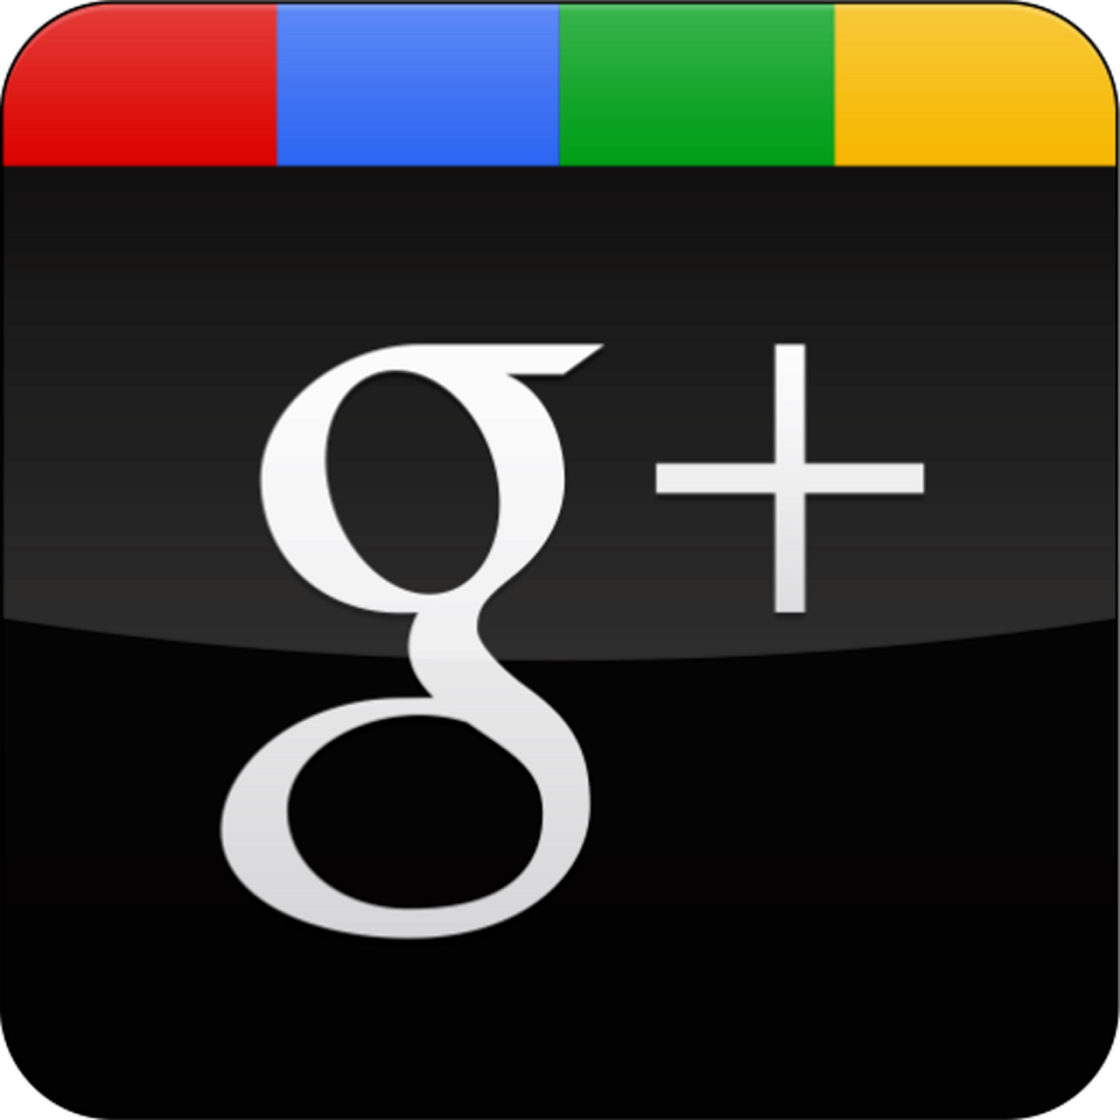 Beyond accessibility in Google+ hangouts